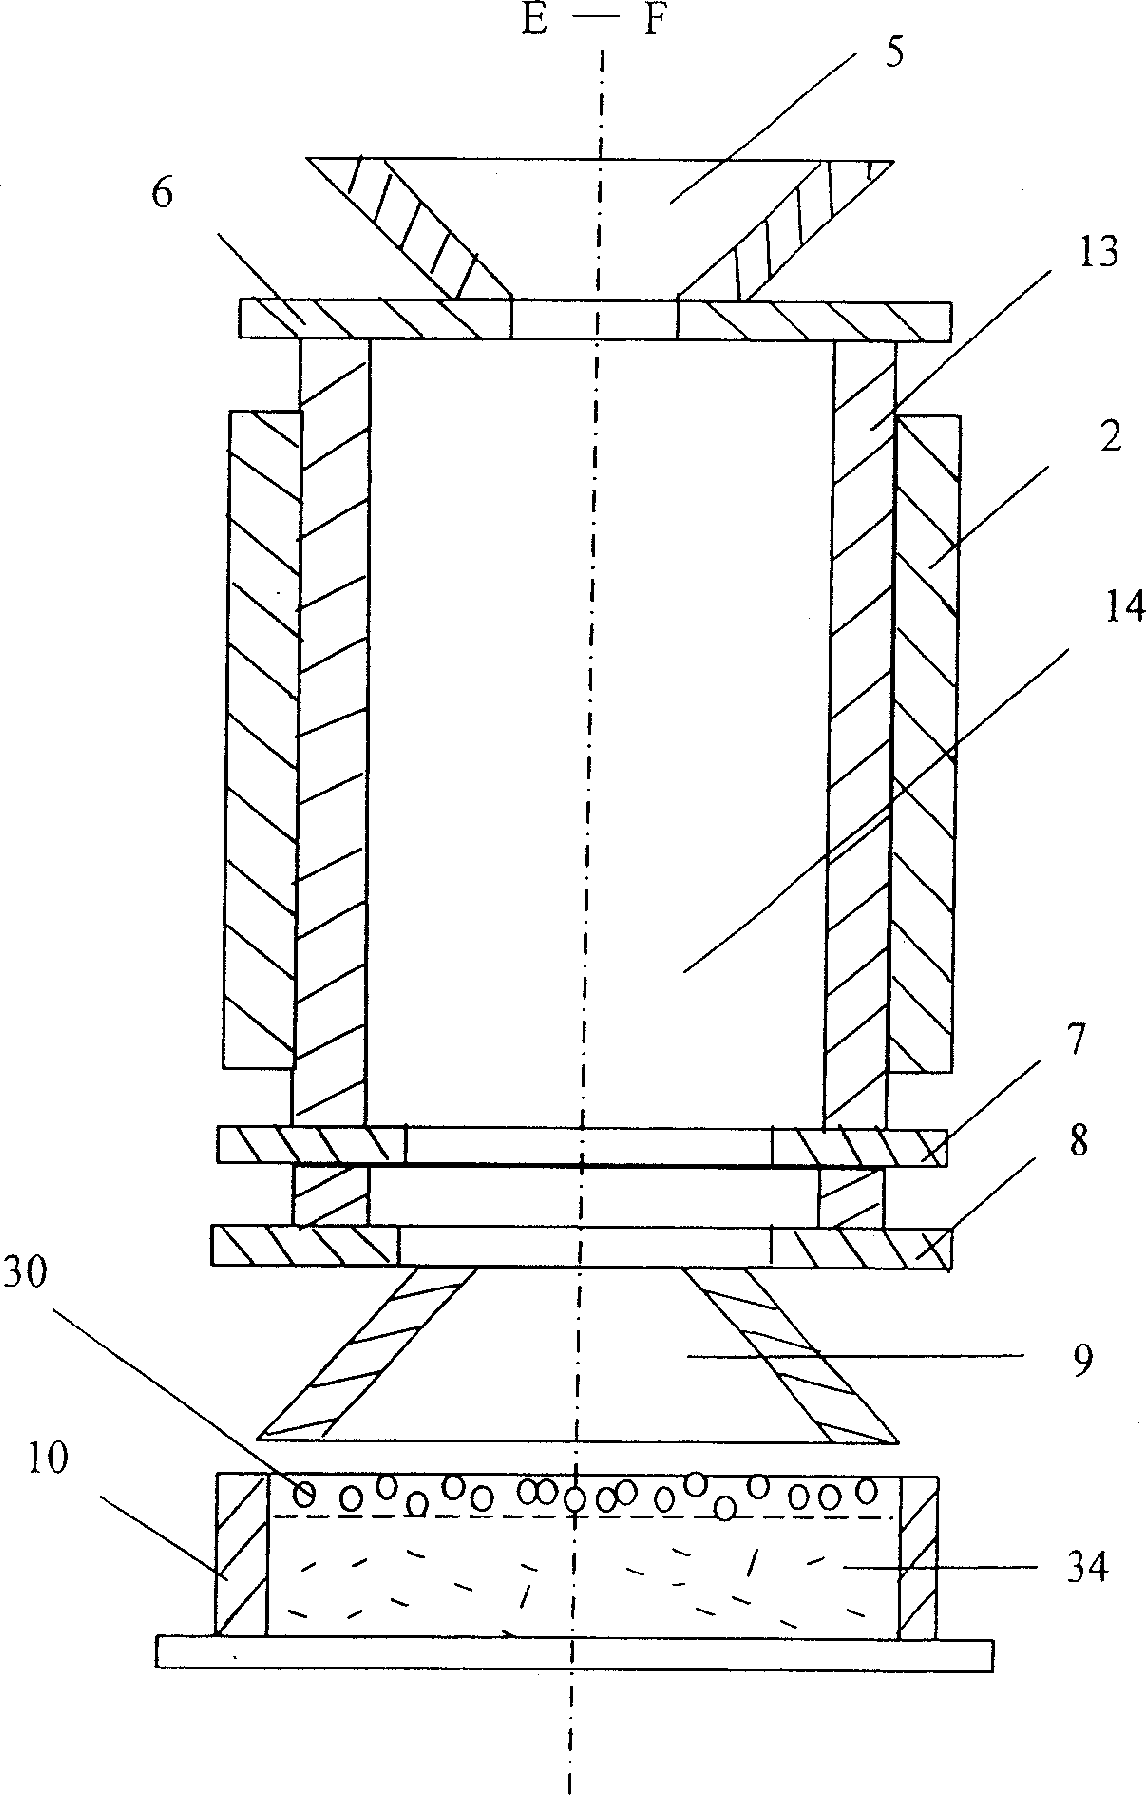 Method of manufacturing low carbon sponge iron using microwave vertical furnace